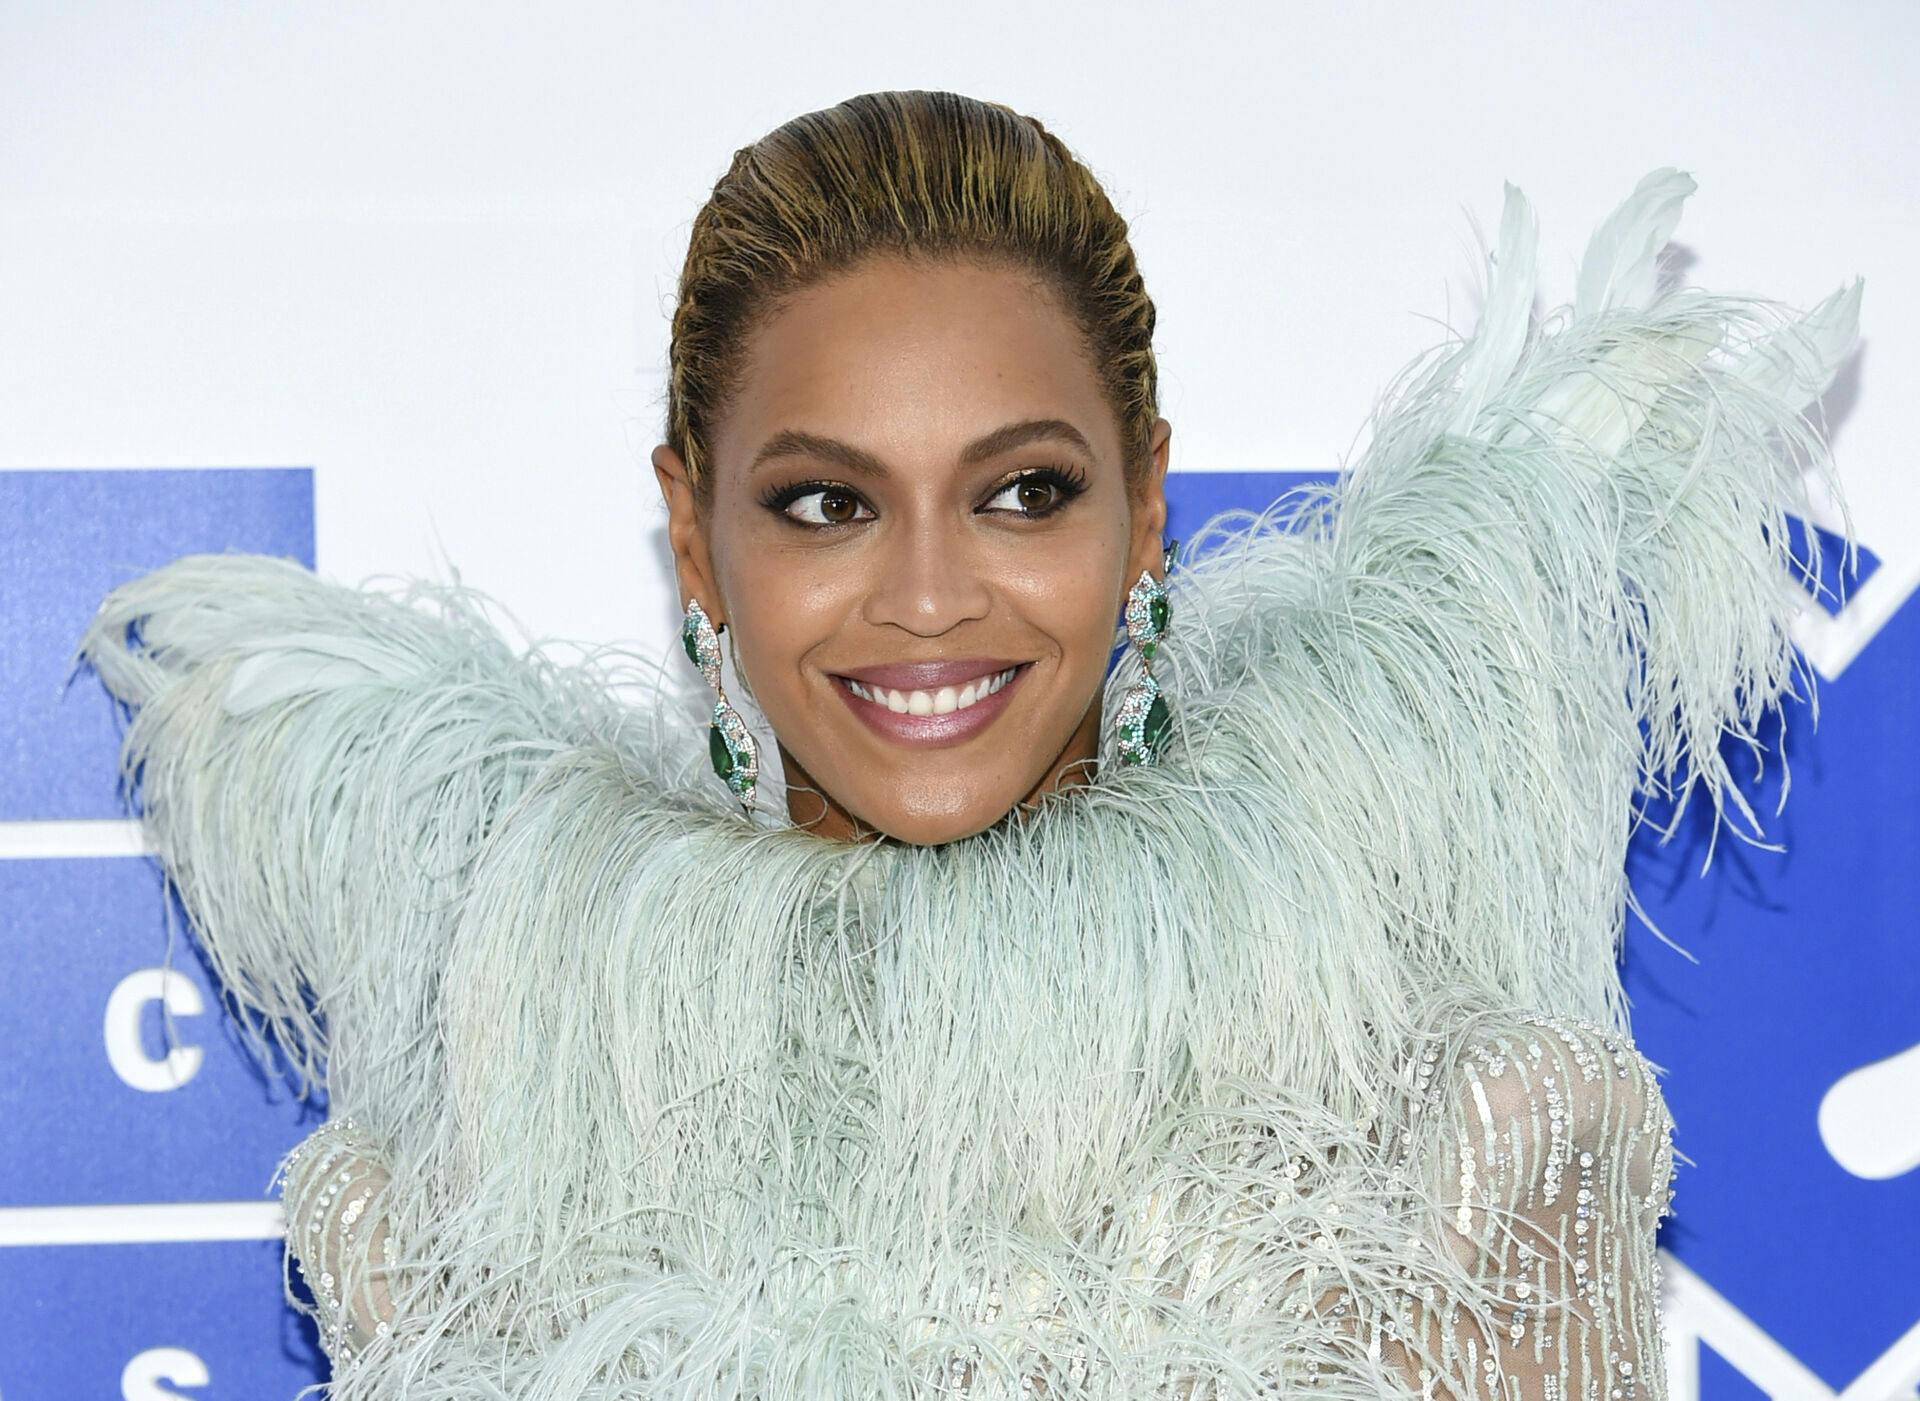 Beyonce Knowles arrives at the MTV Video Music Awards at Madison Square Garden, in New York. Beyonce announced on her Instagram account, Wednesday, Feb. 1, 2017, that she is expecting twins. (Photo by Evan Agostini/Invision/AP, File)